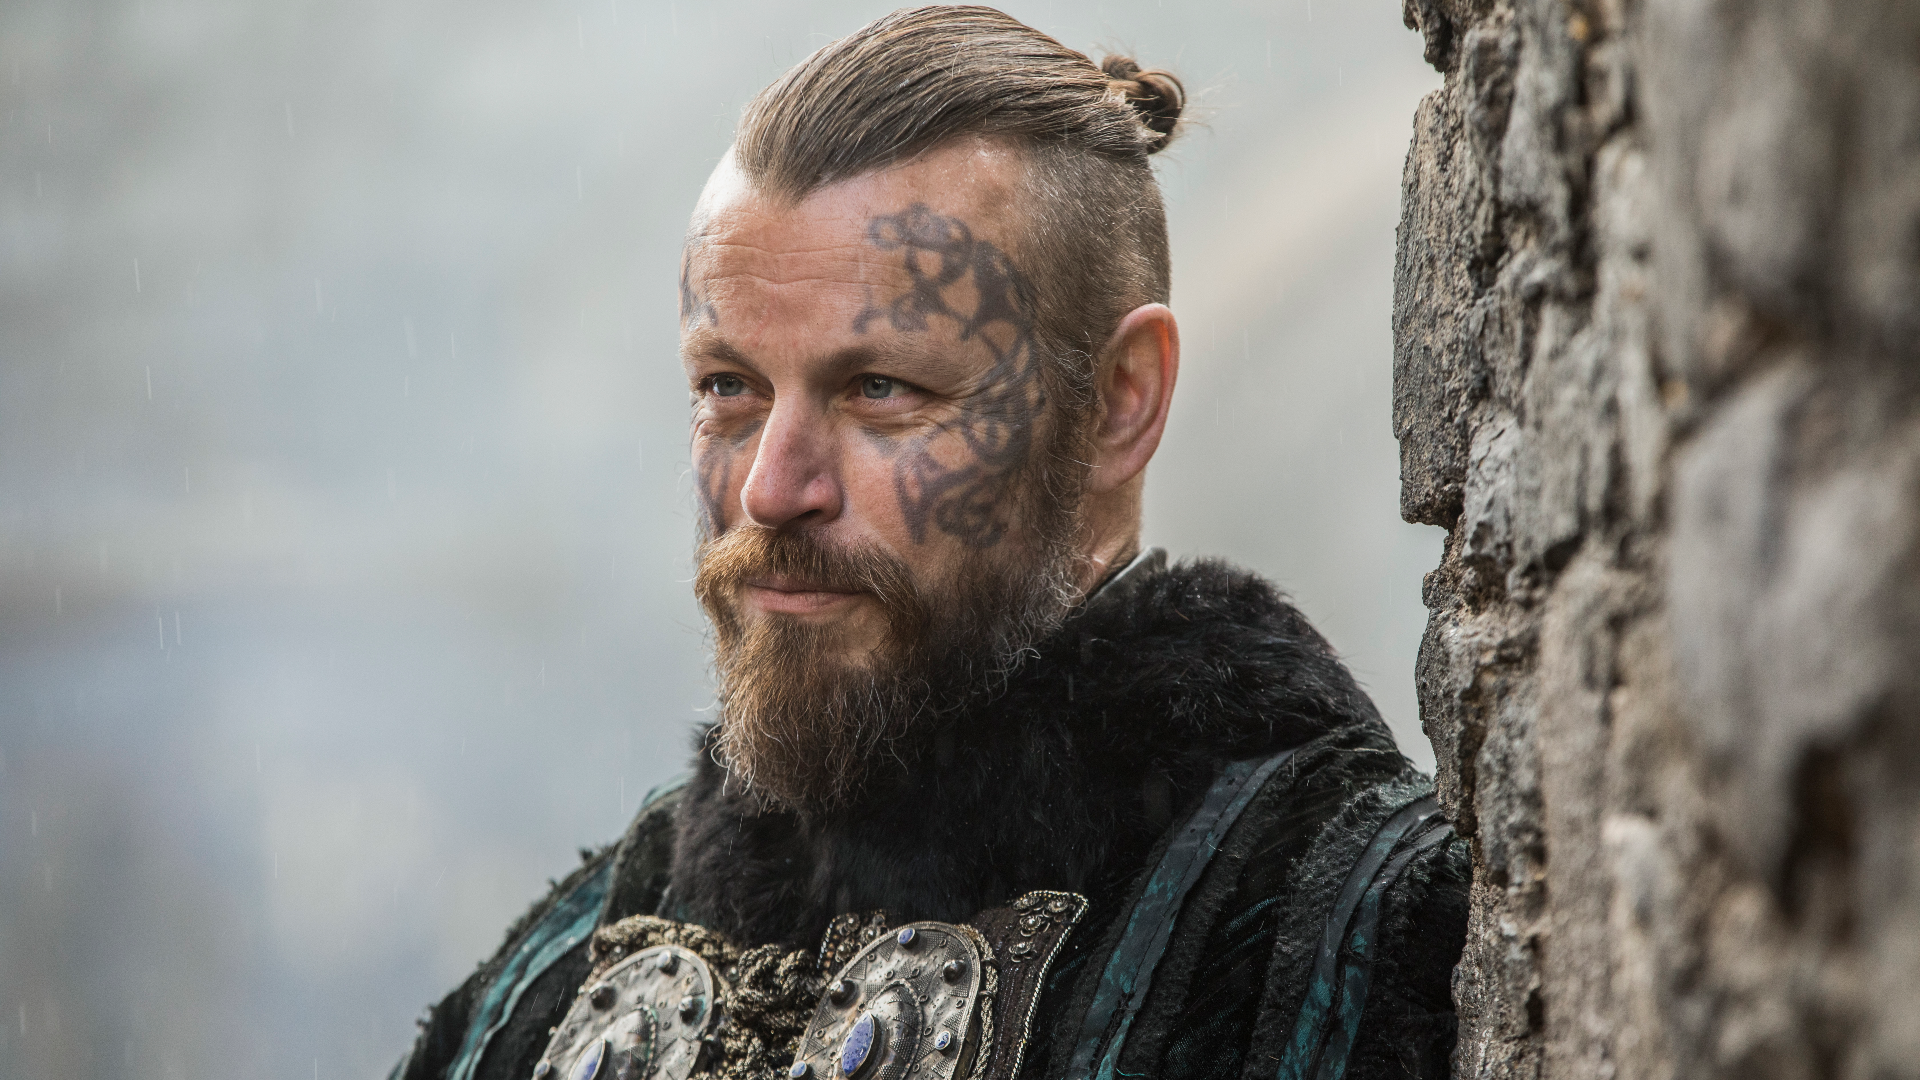 Vikings' Ending: You Have Questions, The Creator Has Answers